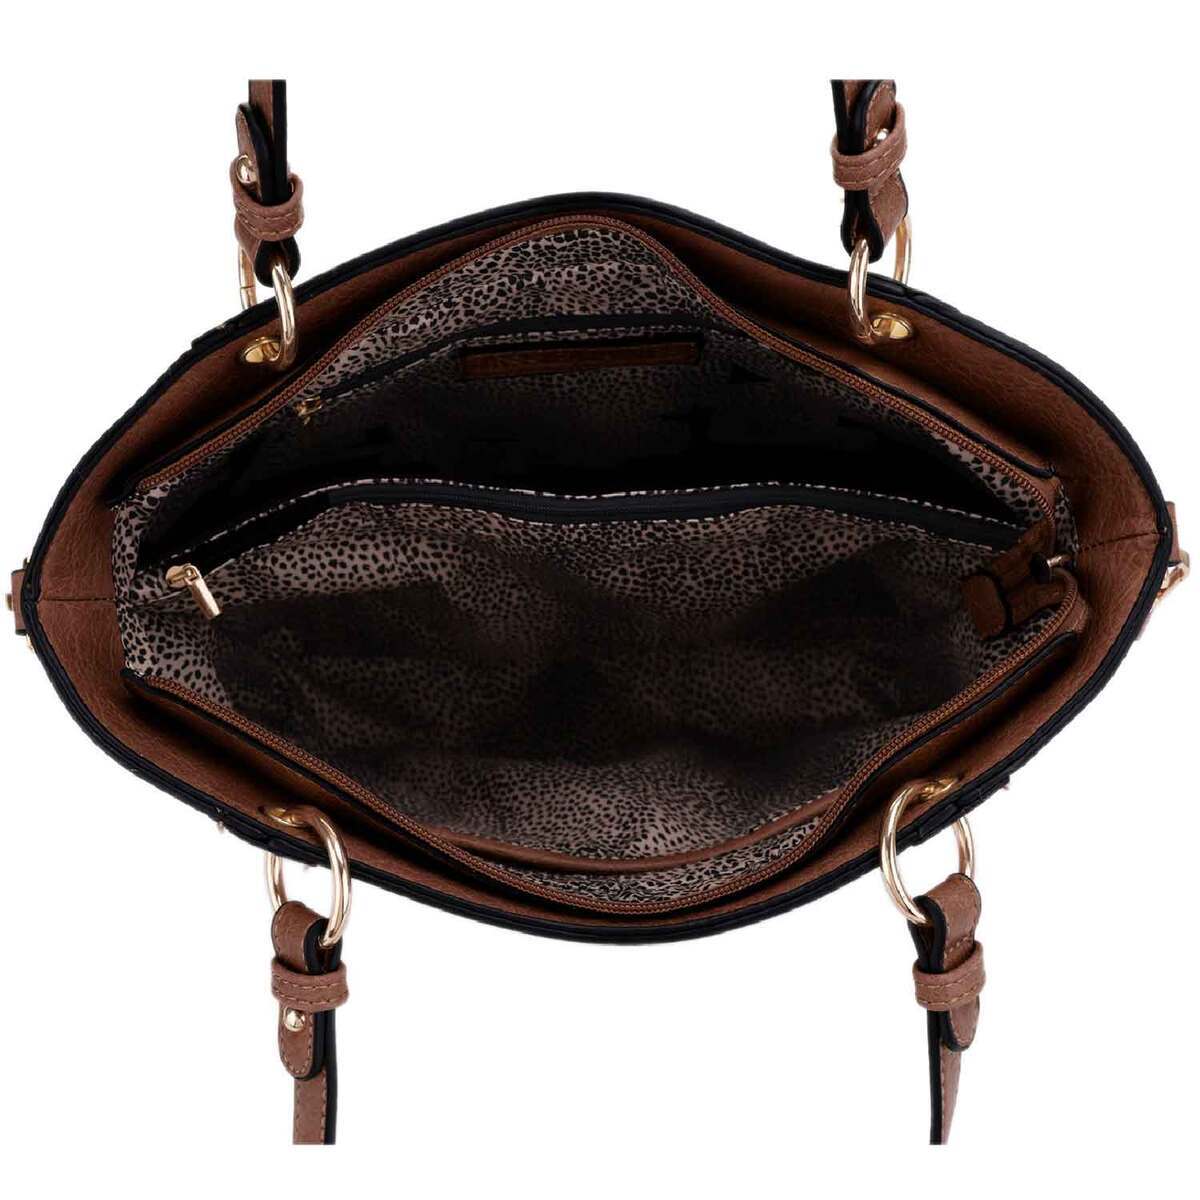 Jessie & James Austin Whipstitching Concealed Carry Lock and Key Tote ...